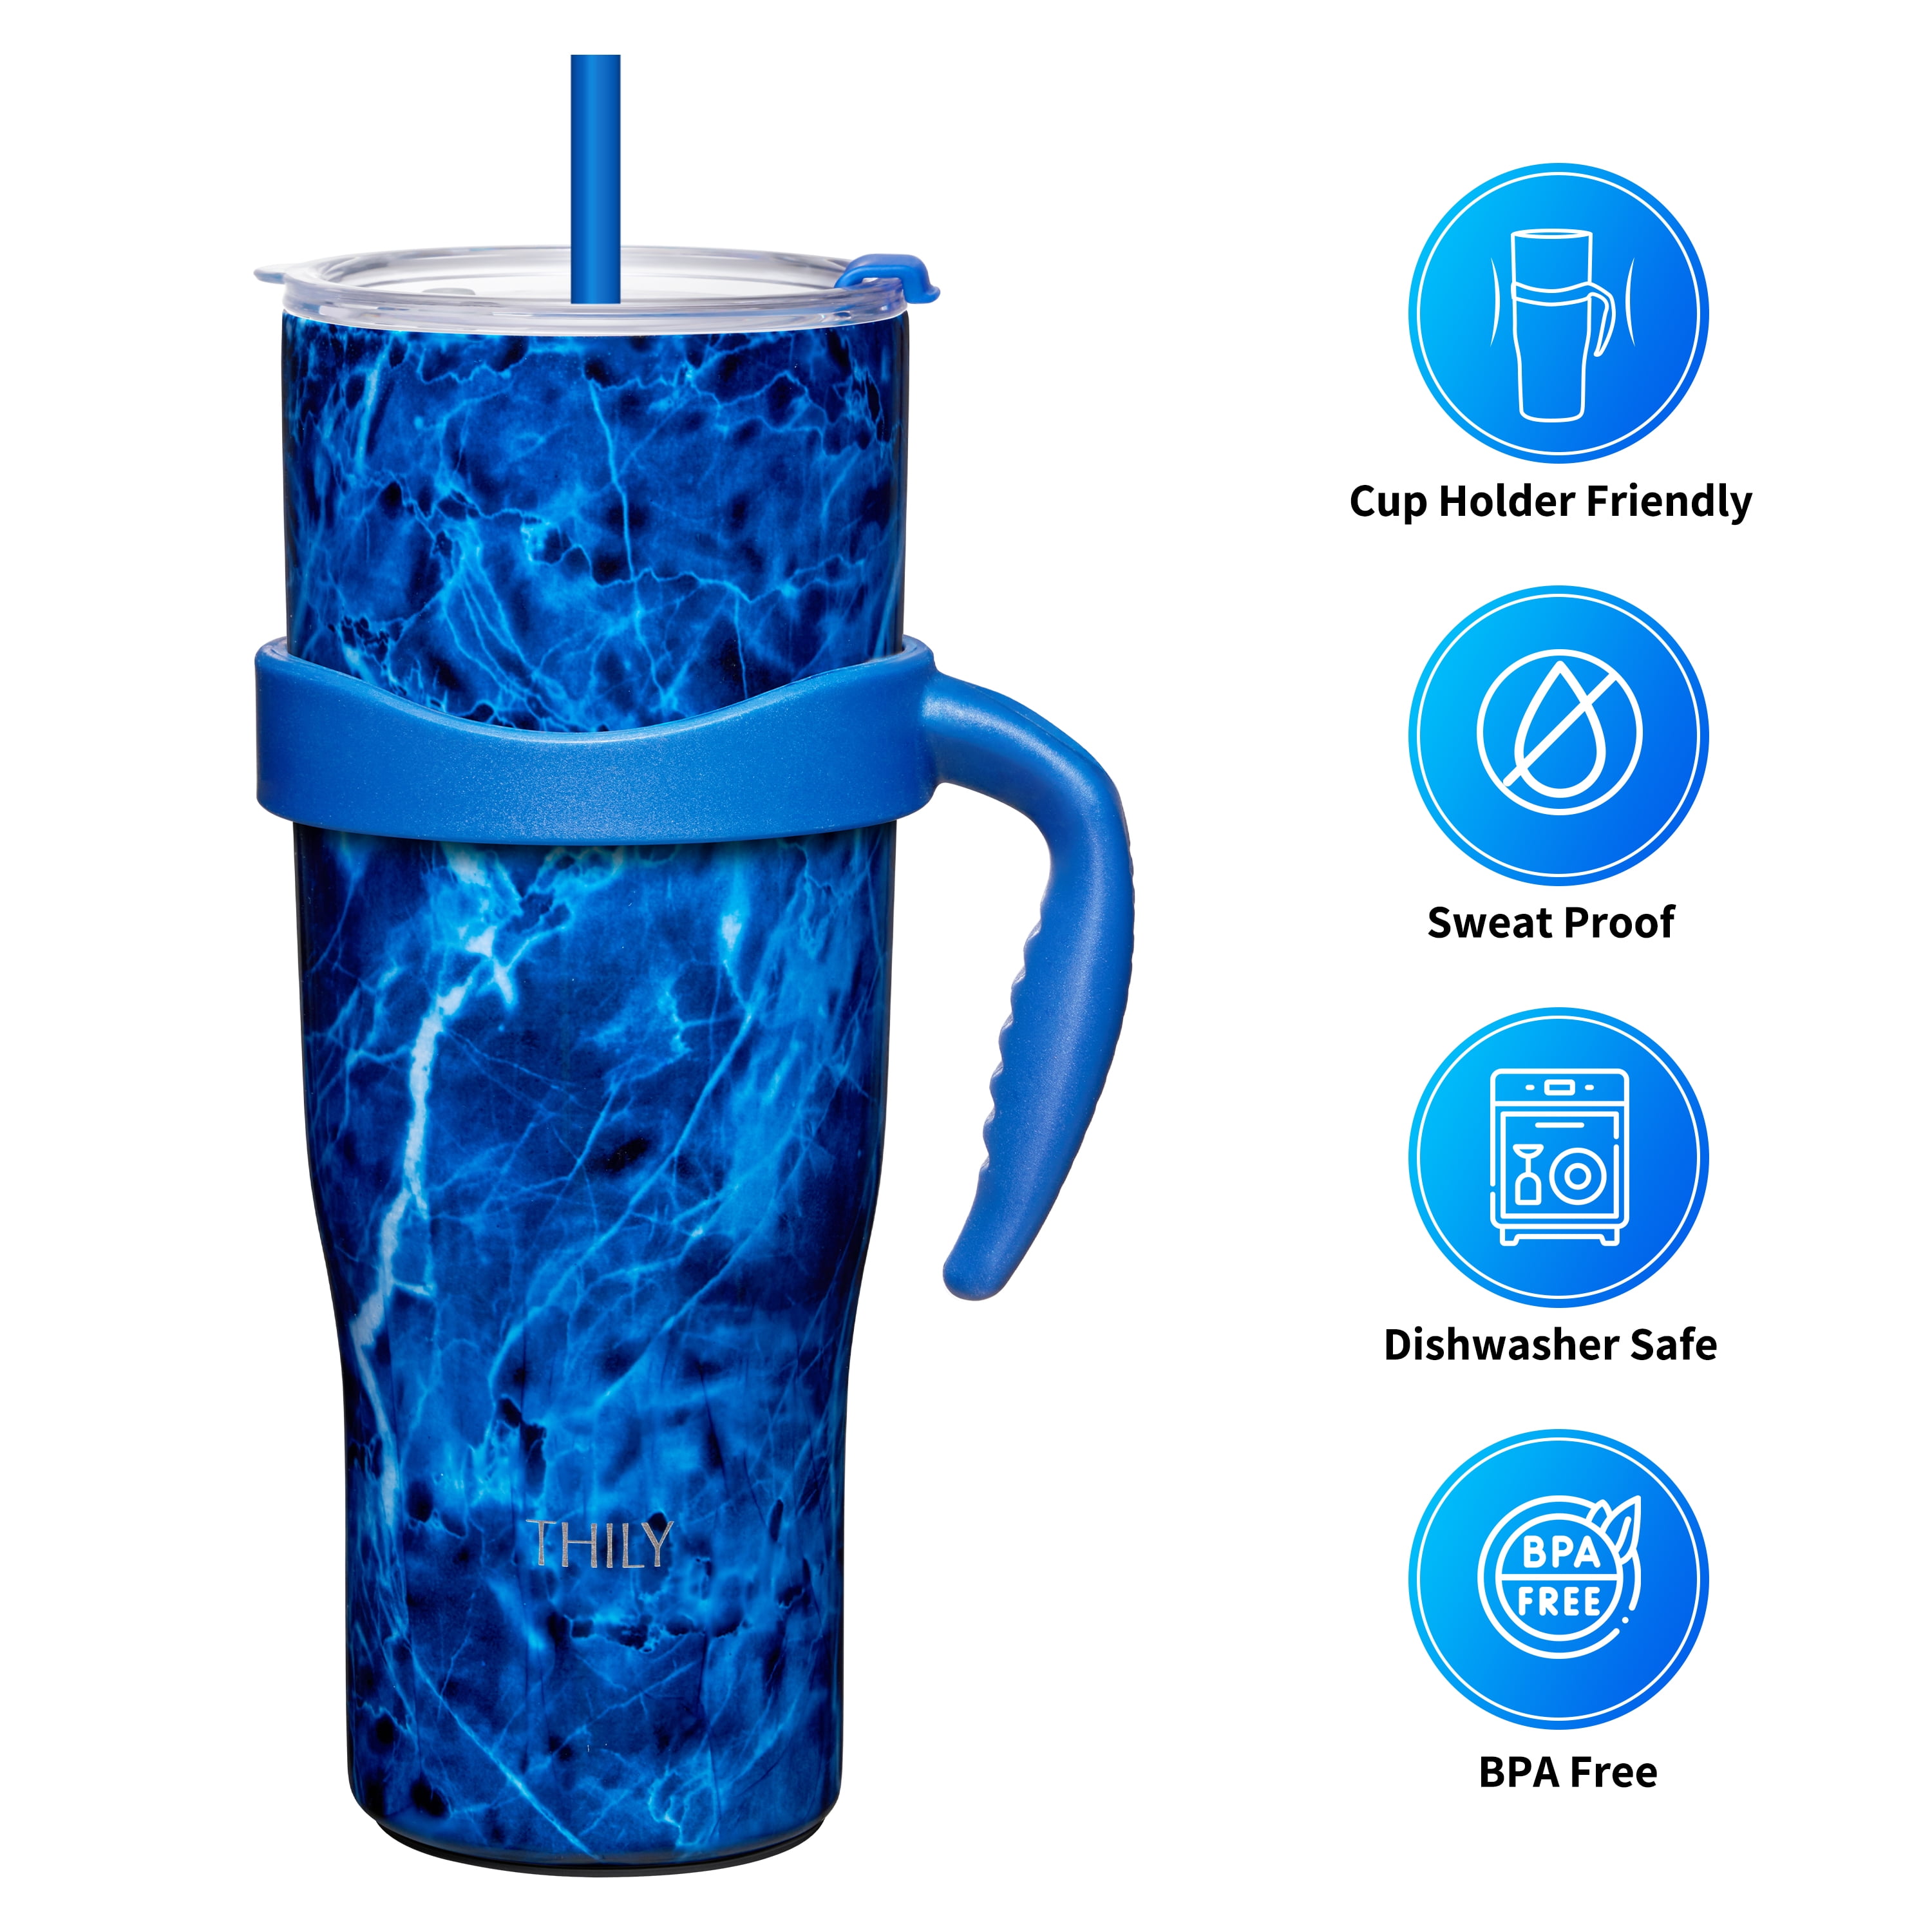 THILY 40 oz Insulated Tumbler with Handle - Stainless Steel Triple  Insulated Coffee Travel Mug with Splash-Proof Lid and Reusable Straws, for  Home, Office, Travel, Party, Blue Maple 